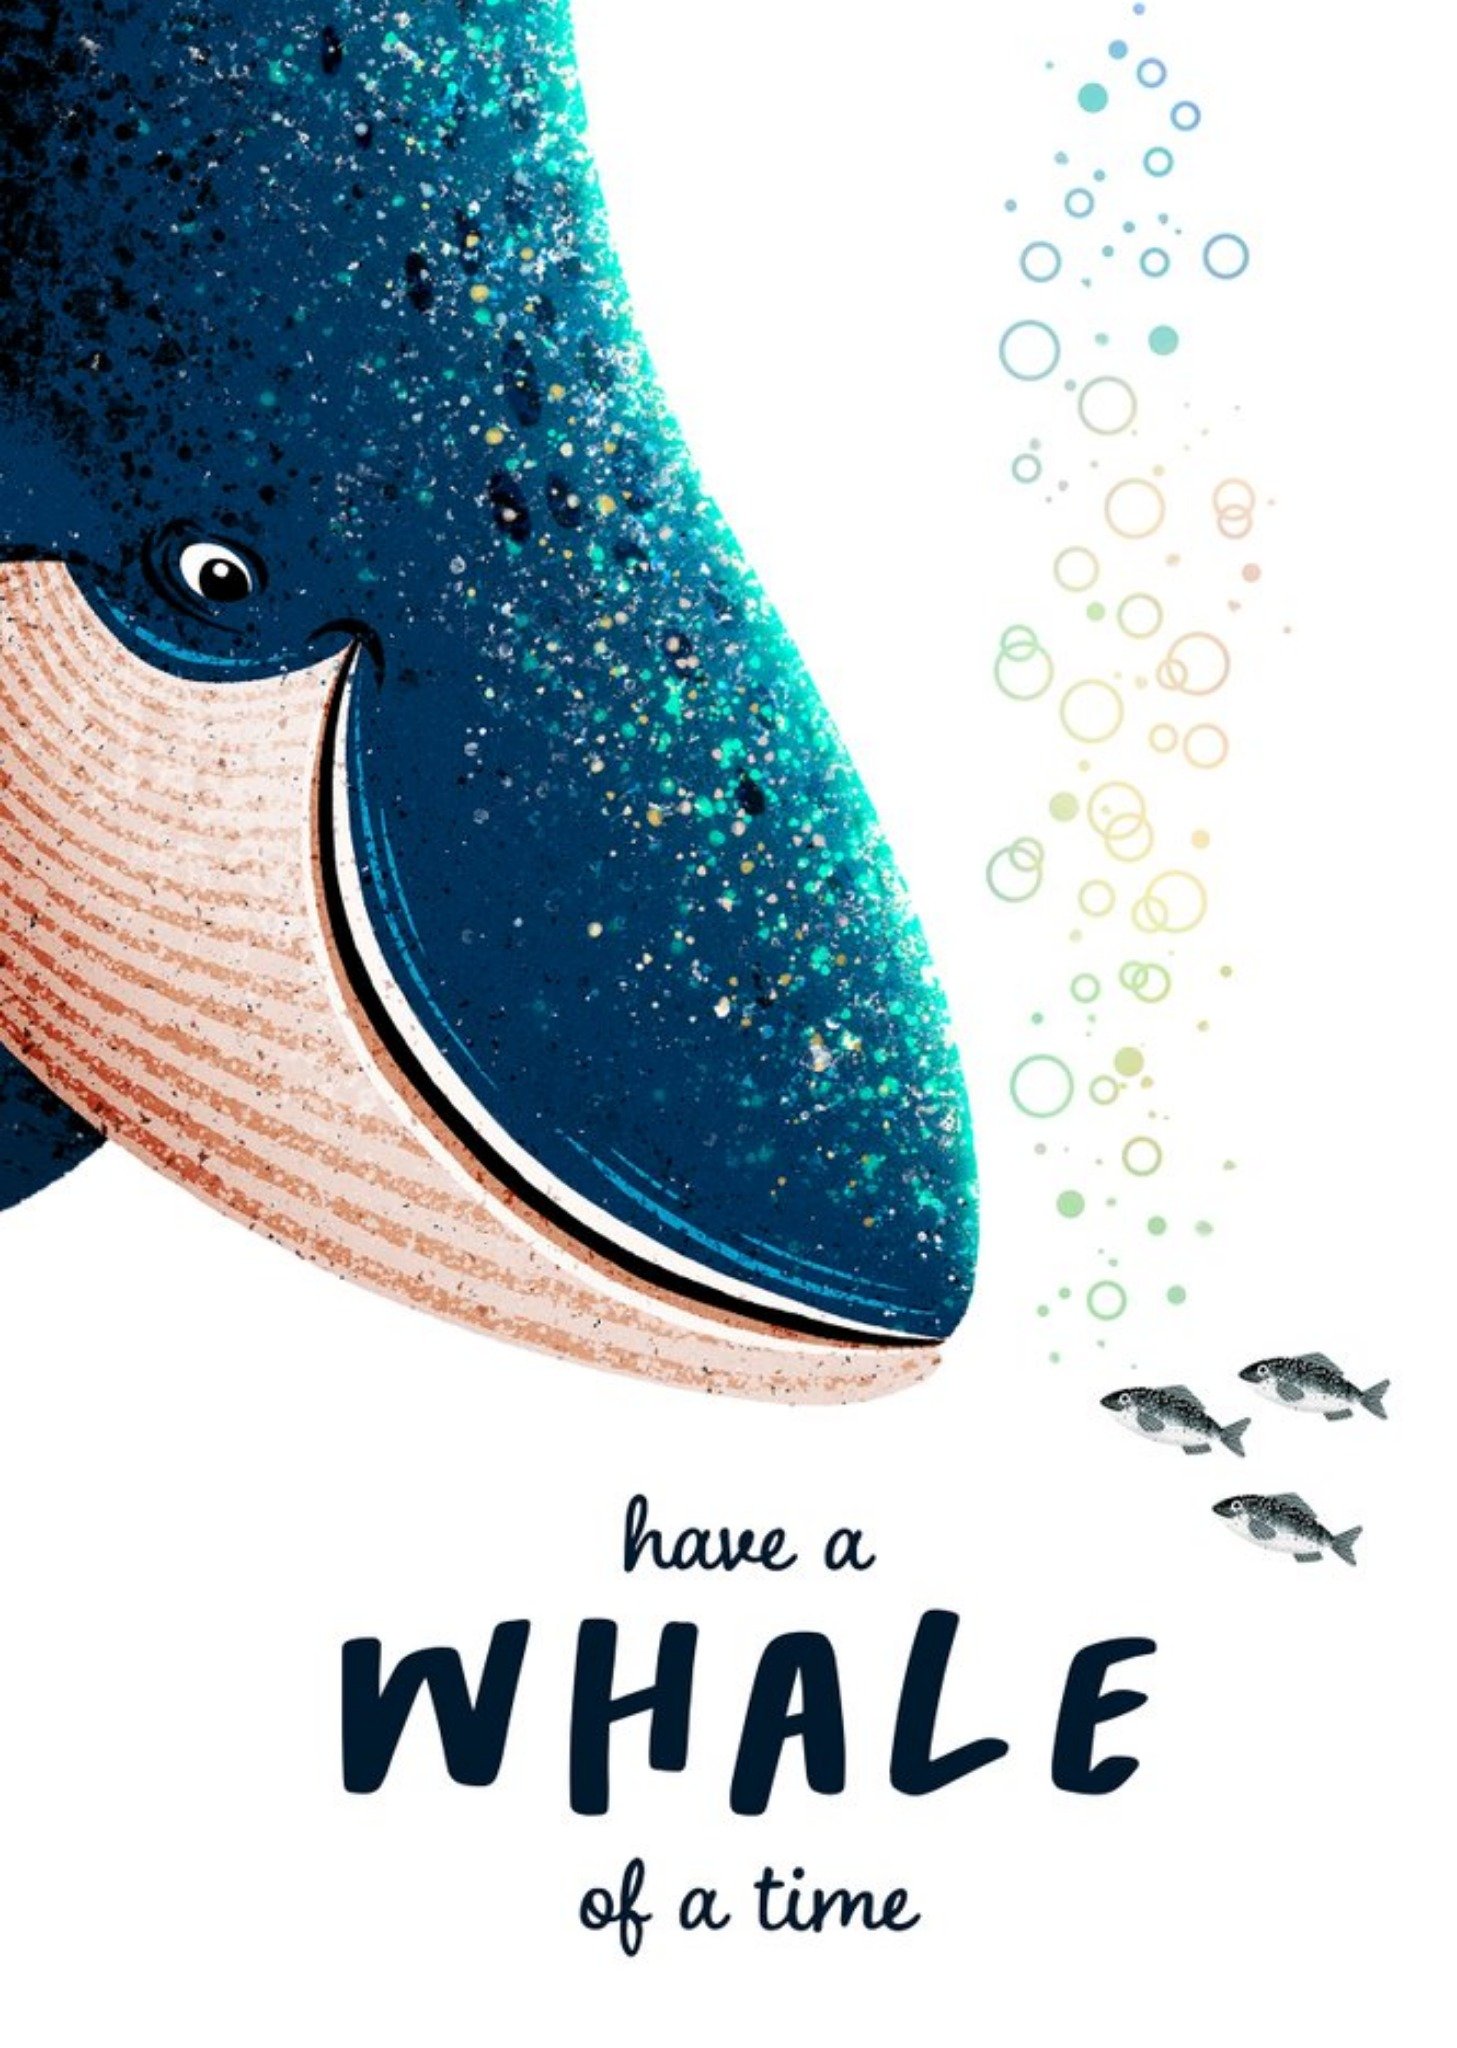 Moonpig Folio Illustration Of A Whale And Three Fishes. Have A Whale Of A Time Birthday Card Ecard